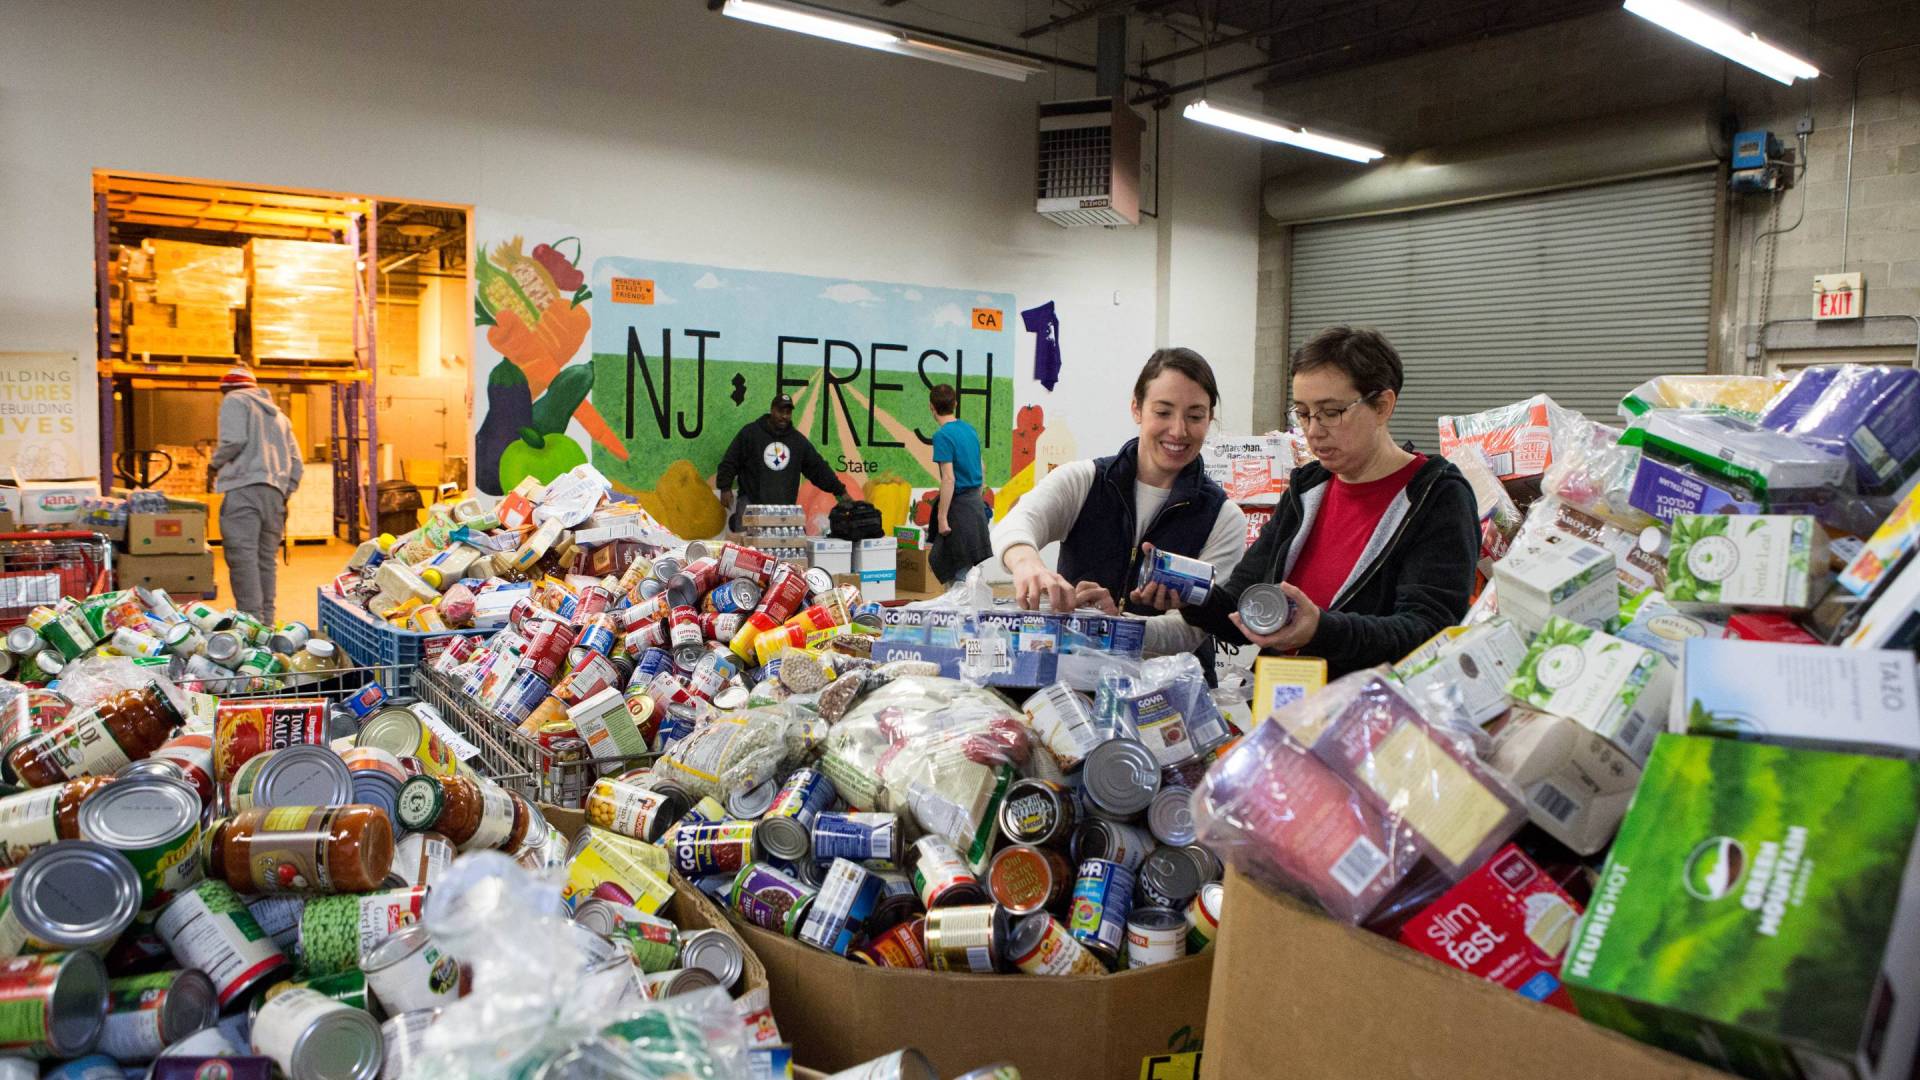 Two volunteers sort canned food donations at the Mercer Street food bank